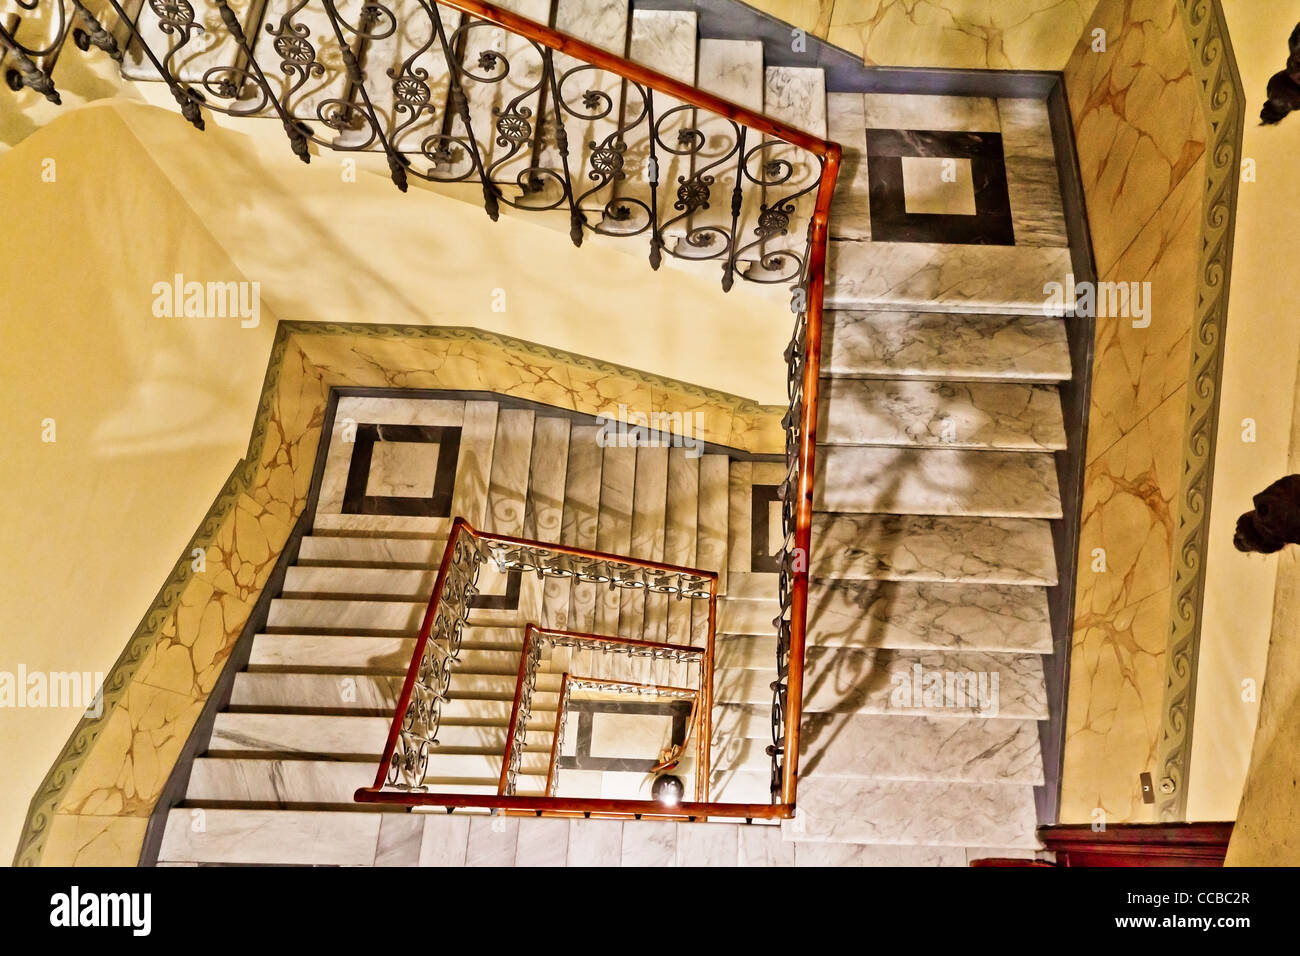 Looking down a winding marble staircase with a metal rail Stock Photo